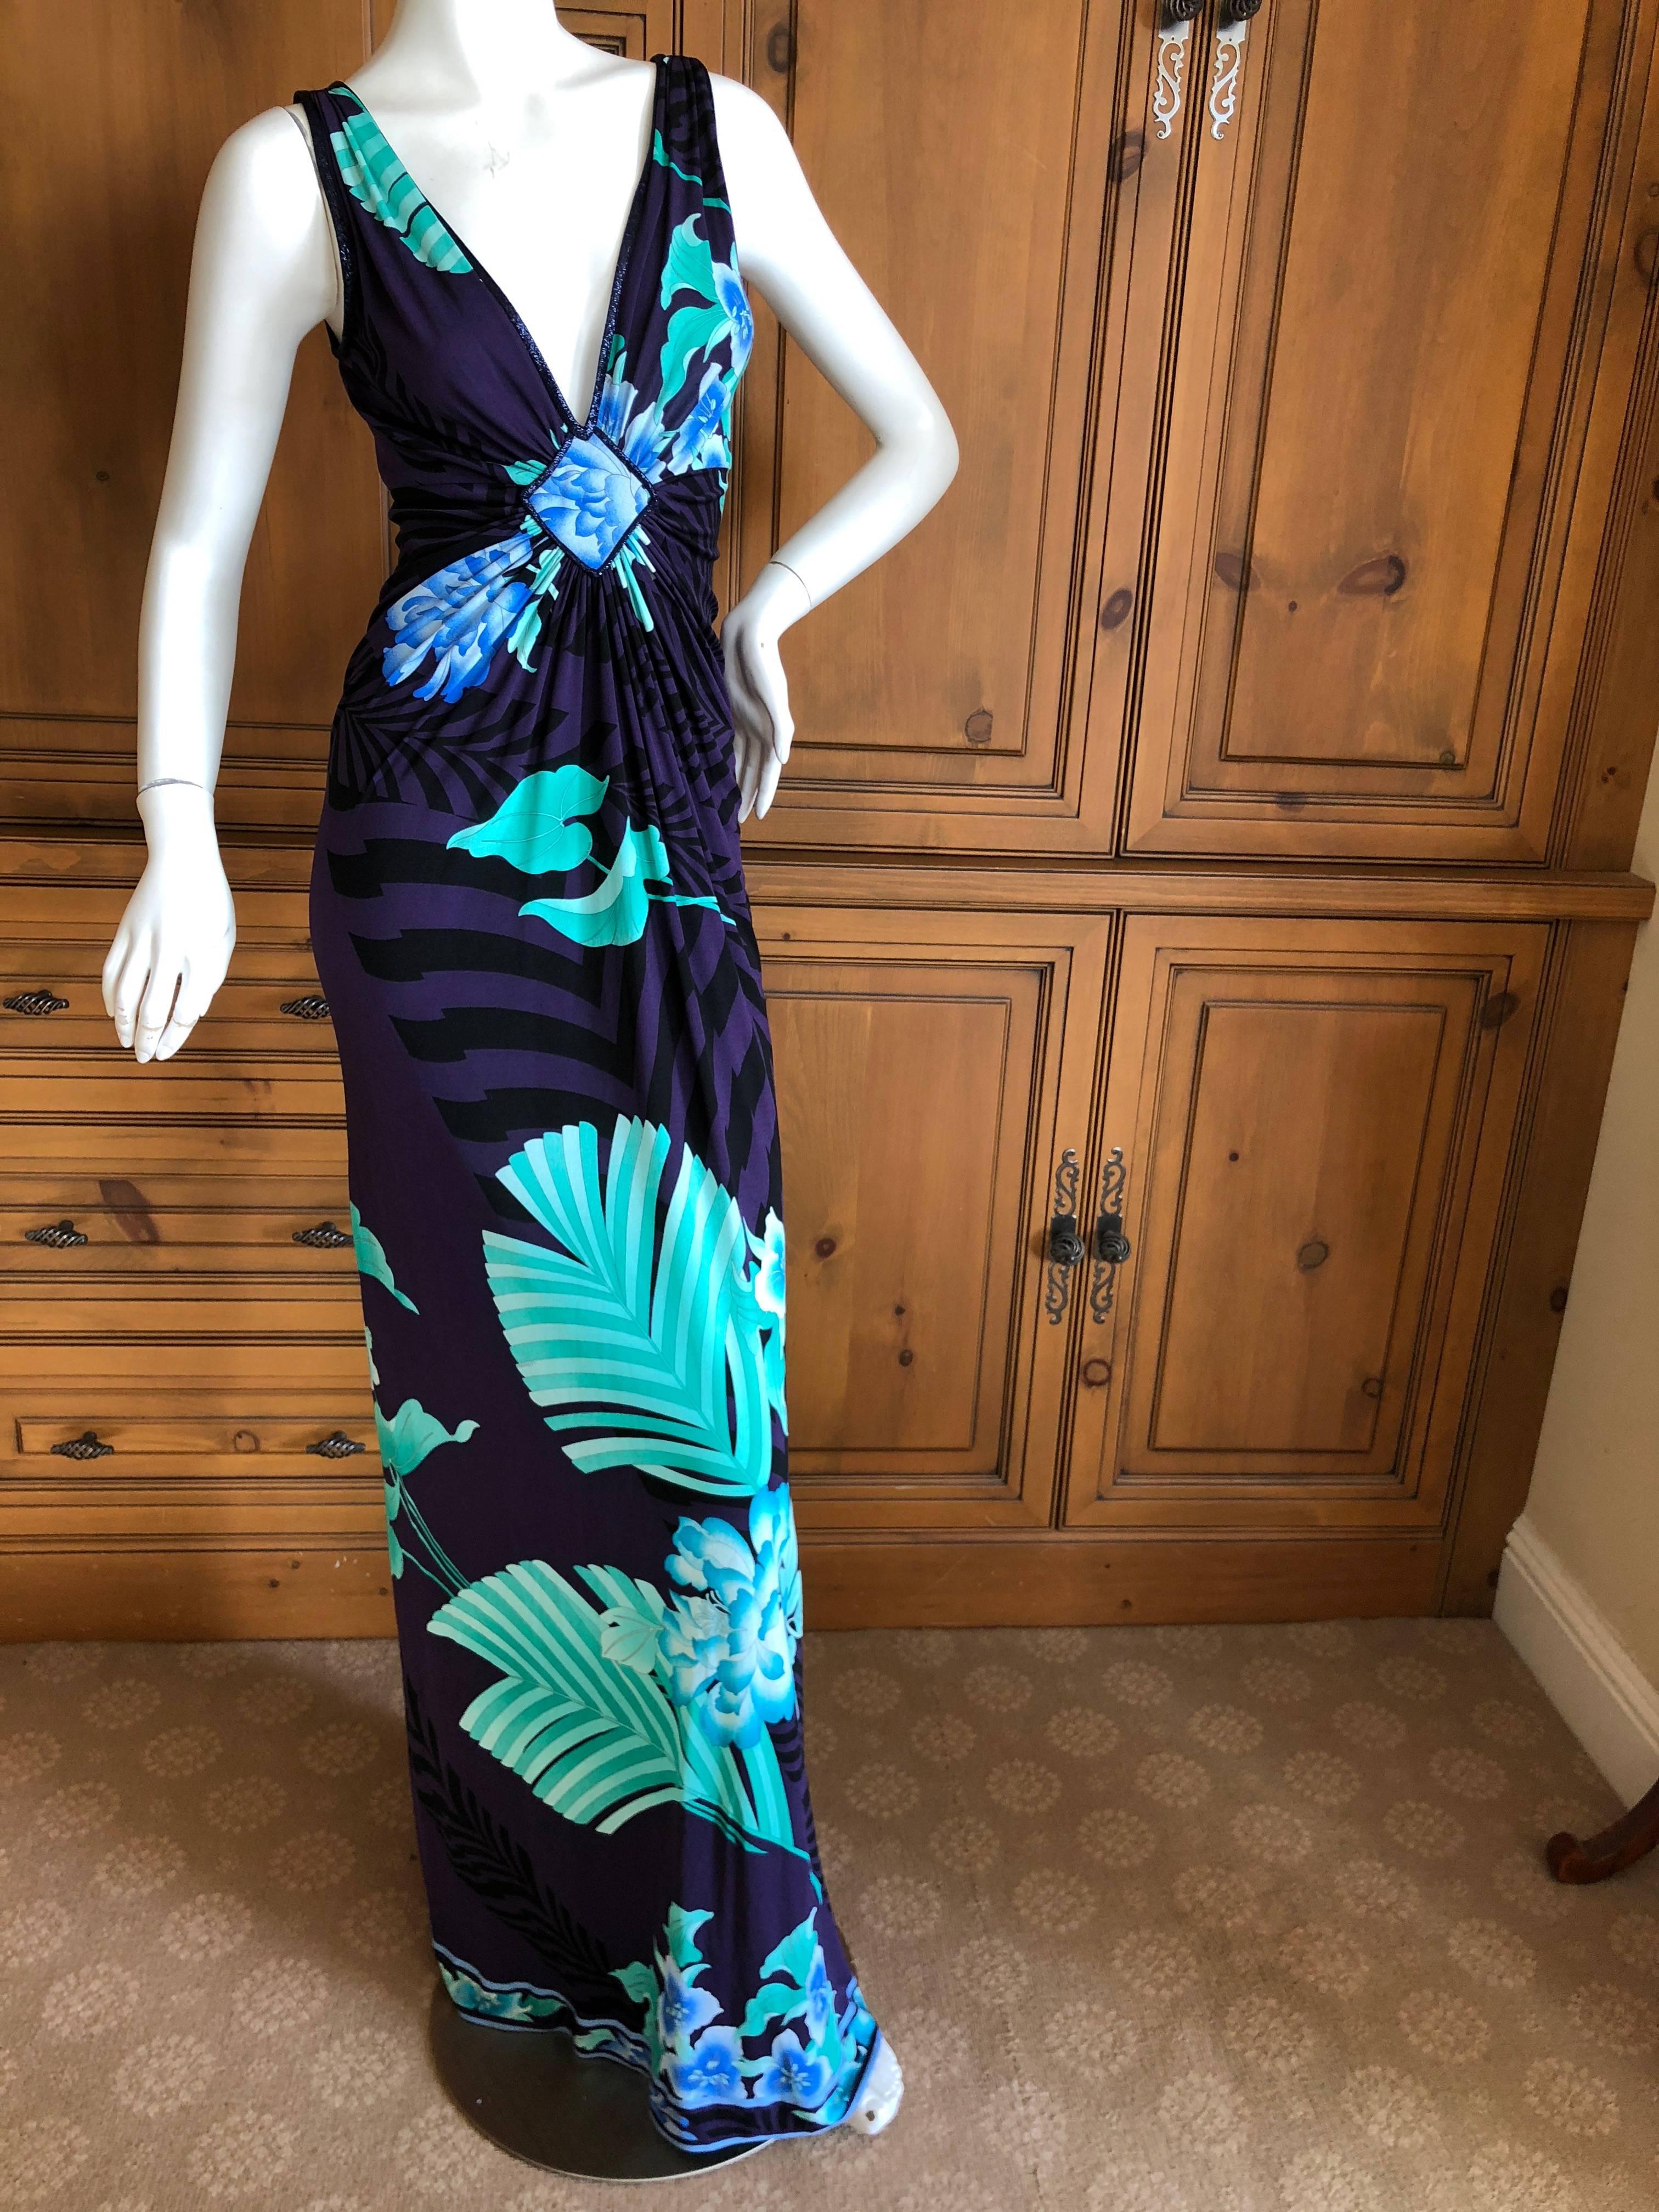 Wonderful floral and leaf print silk jersey dress from Leonard Paris .
Leonard Paris was a contemporary of Pucci, both houses creating brilliant 60's patterns on silk jersey.
 Both were very expensive, and carried in the best stores